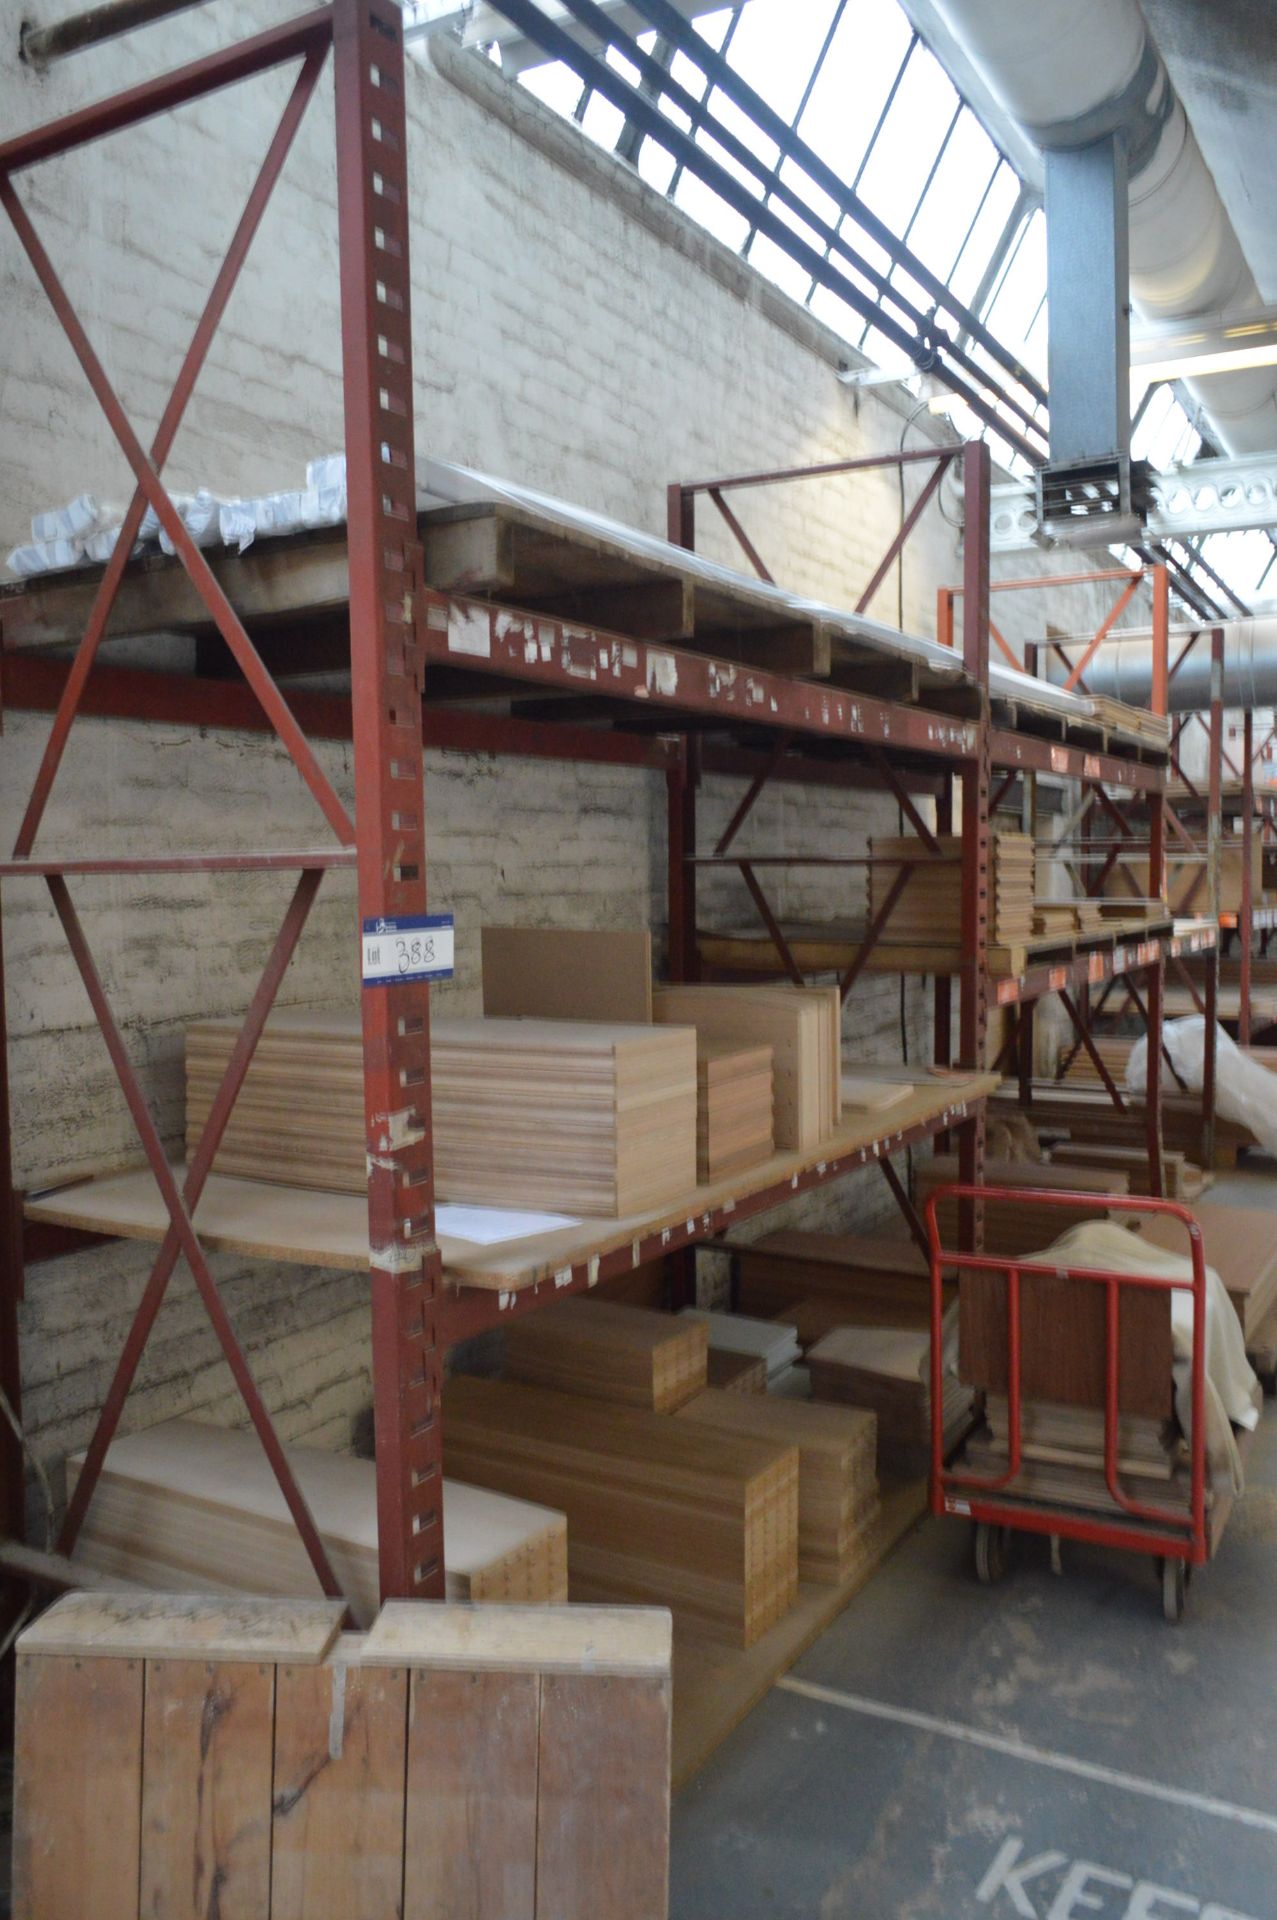 Three-Bay Multi-Tier Pallet Rack, with timber shelving (contents not included) (reserve removal